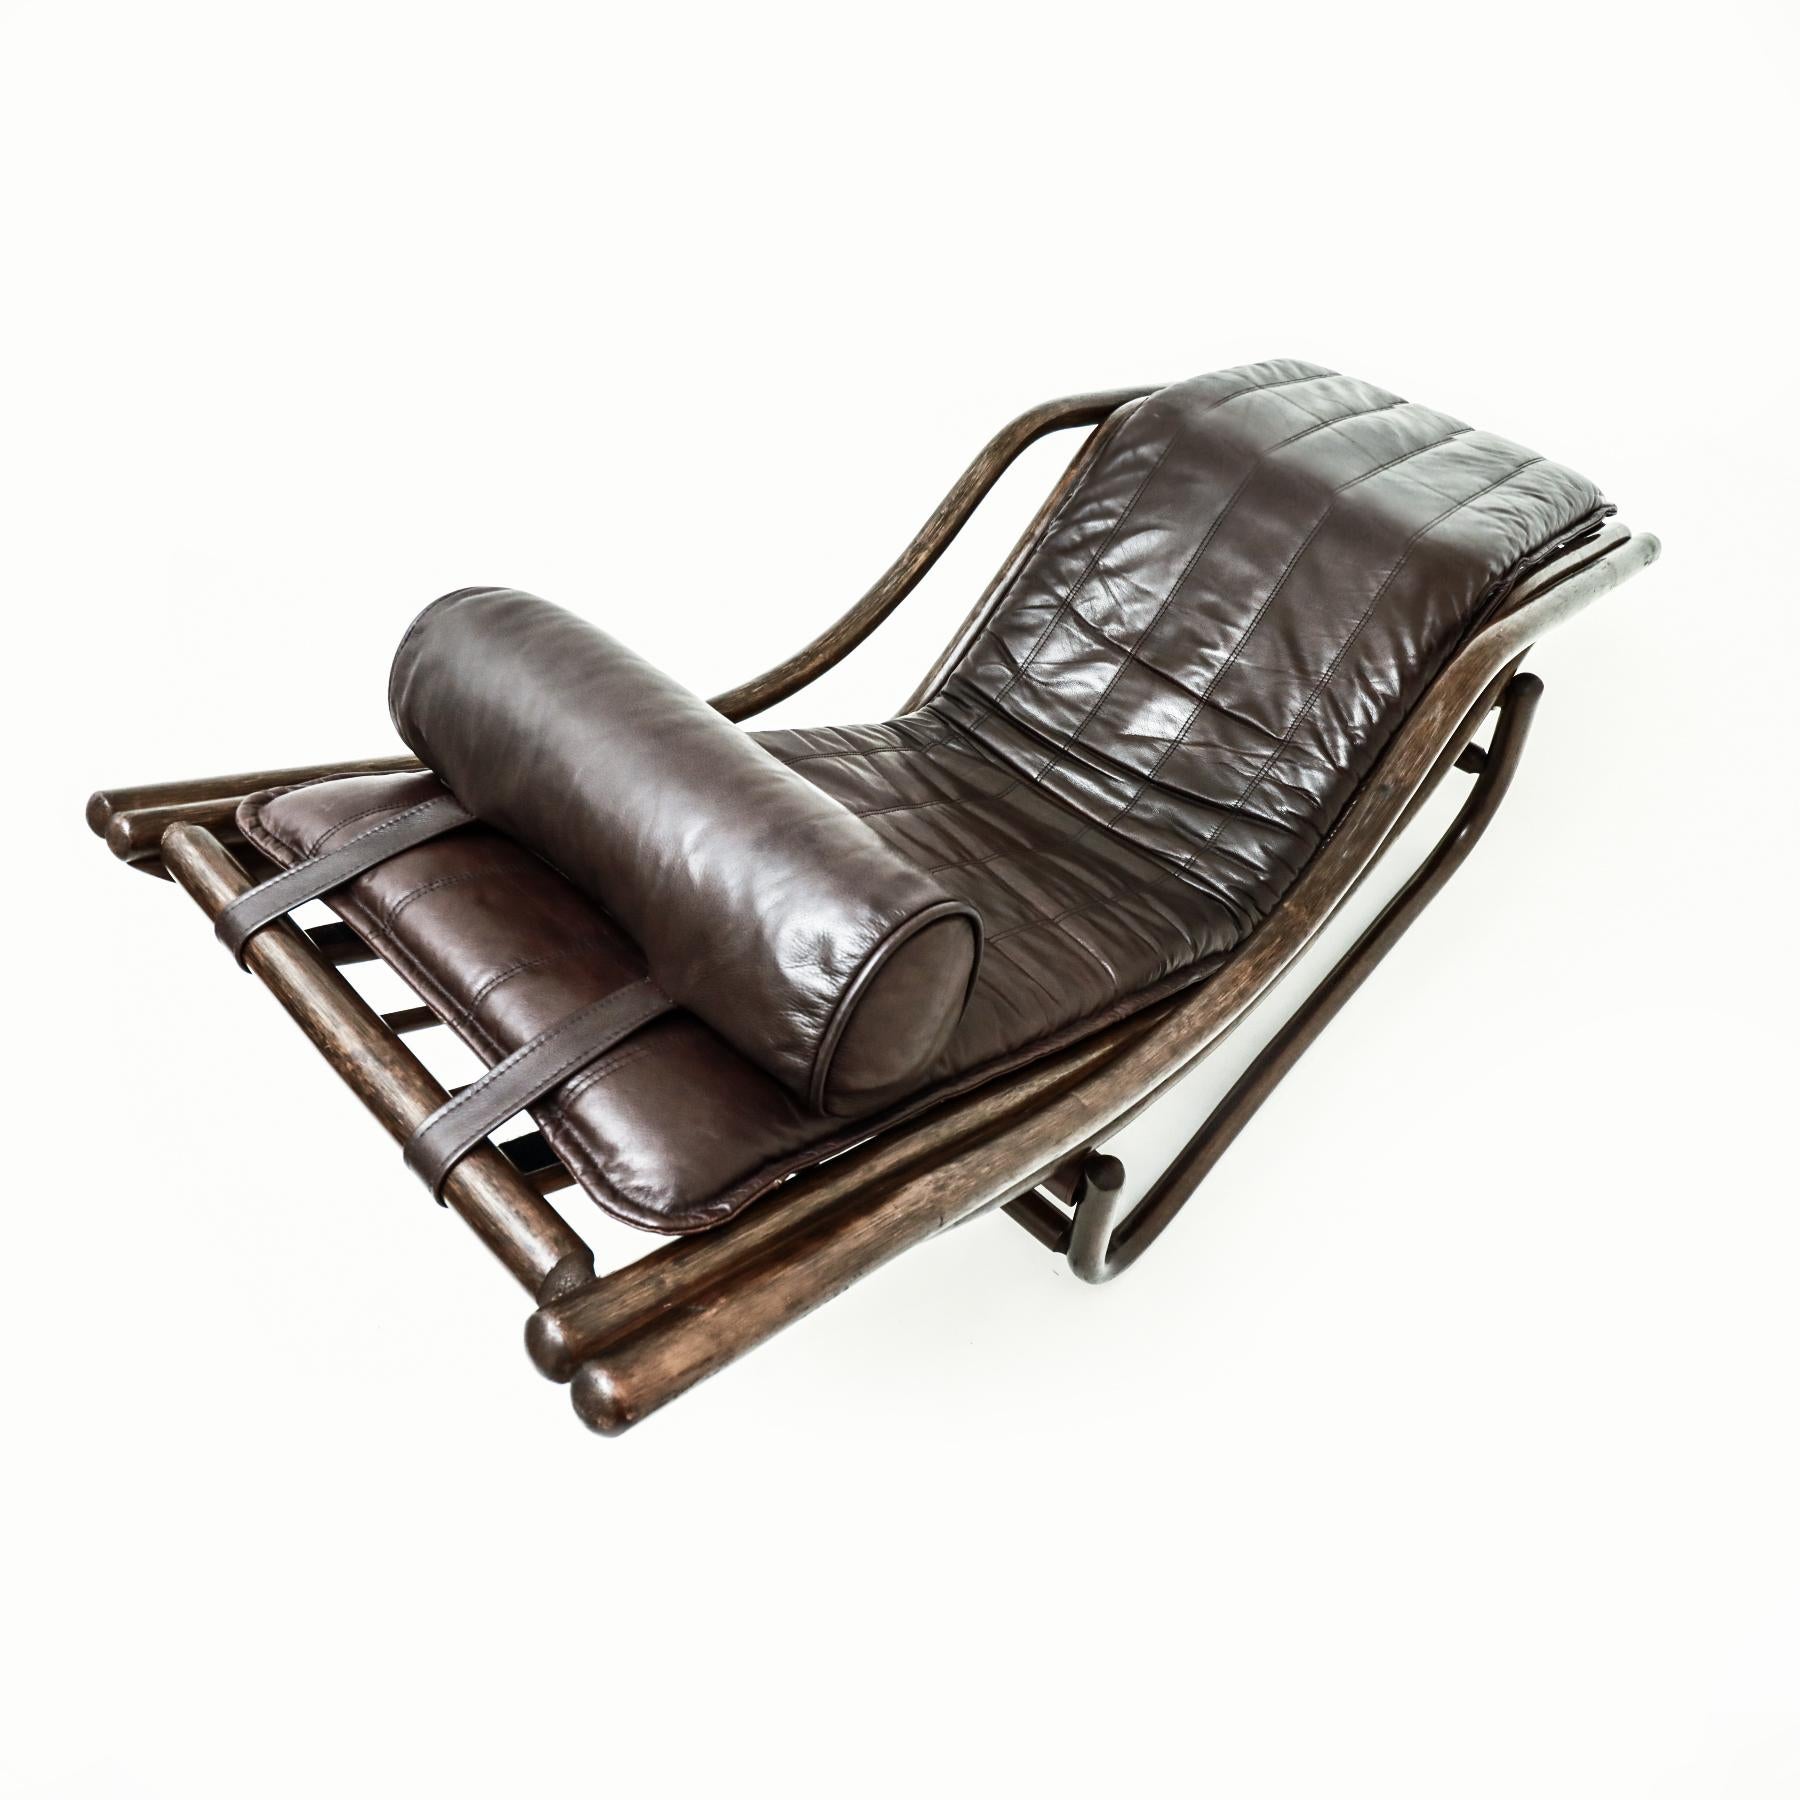 Leather Cane and leather LC4 style chaise longue in the style of Rohe Noordwolde